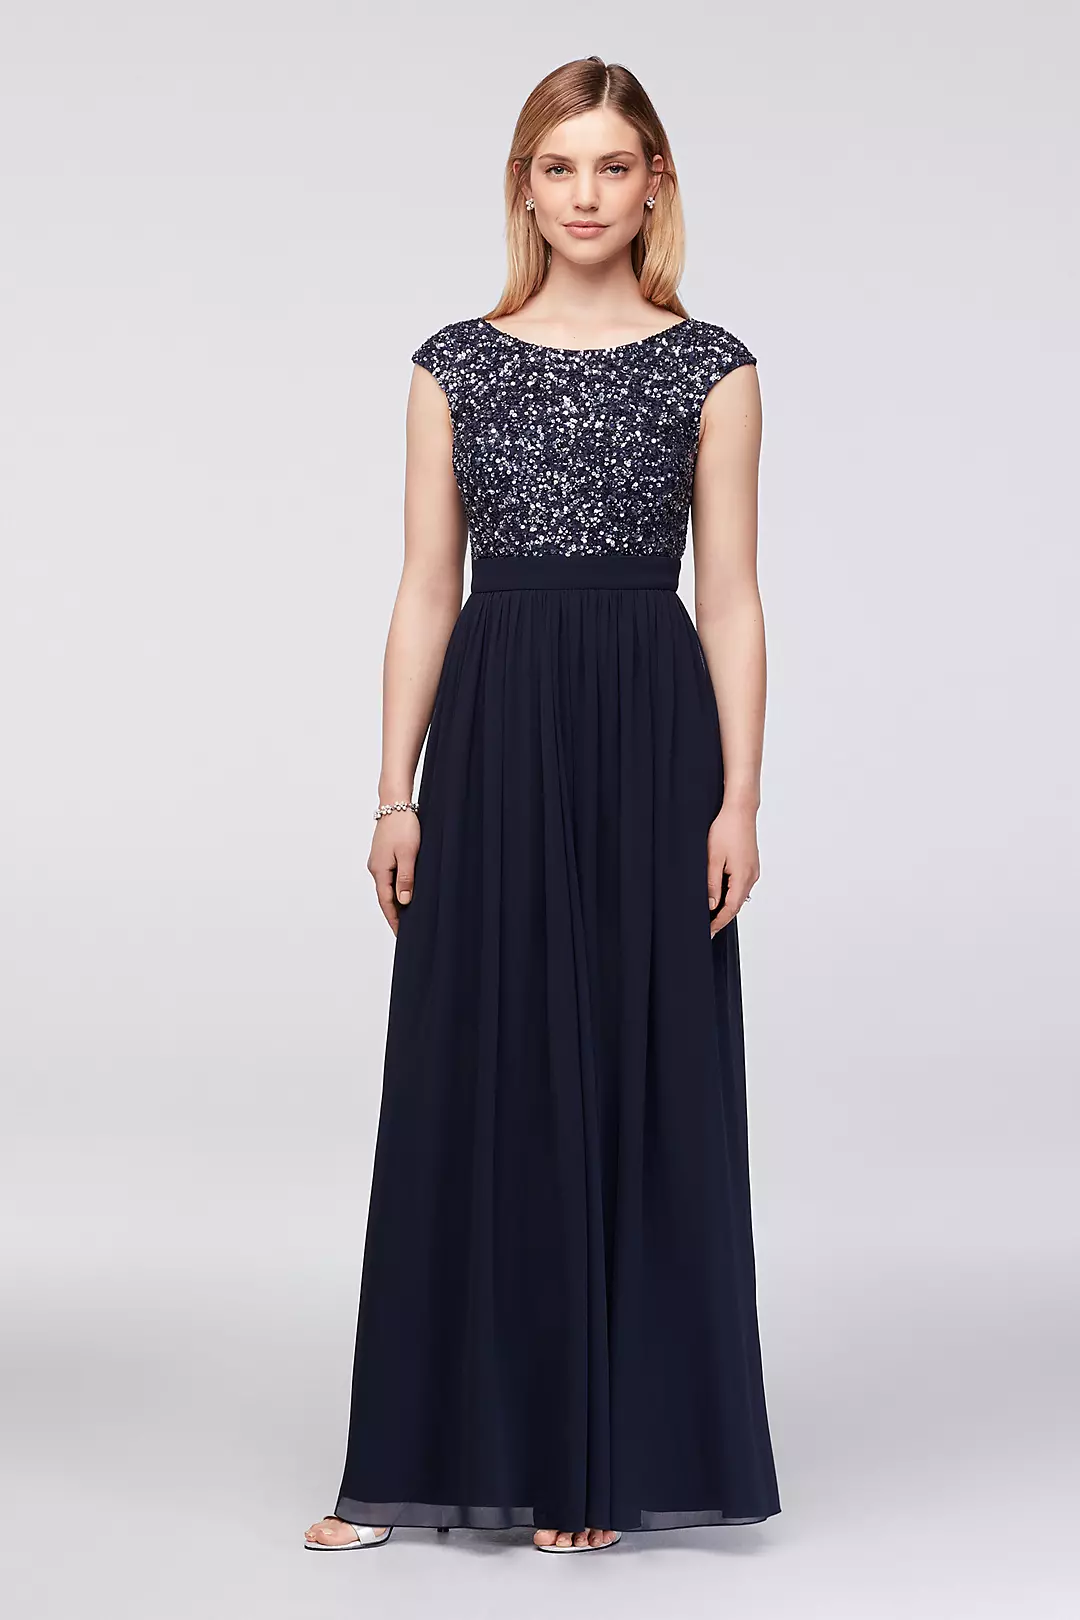 Hand-Beaded Cap Sleeve Gown with Georgette Skirt Image